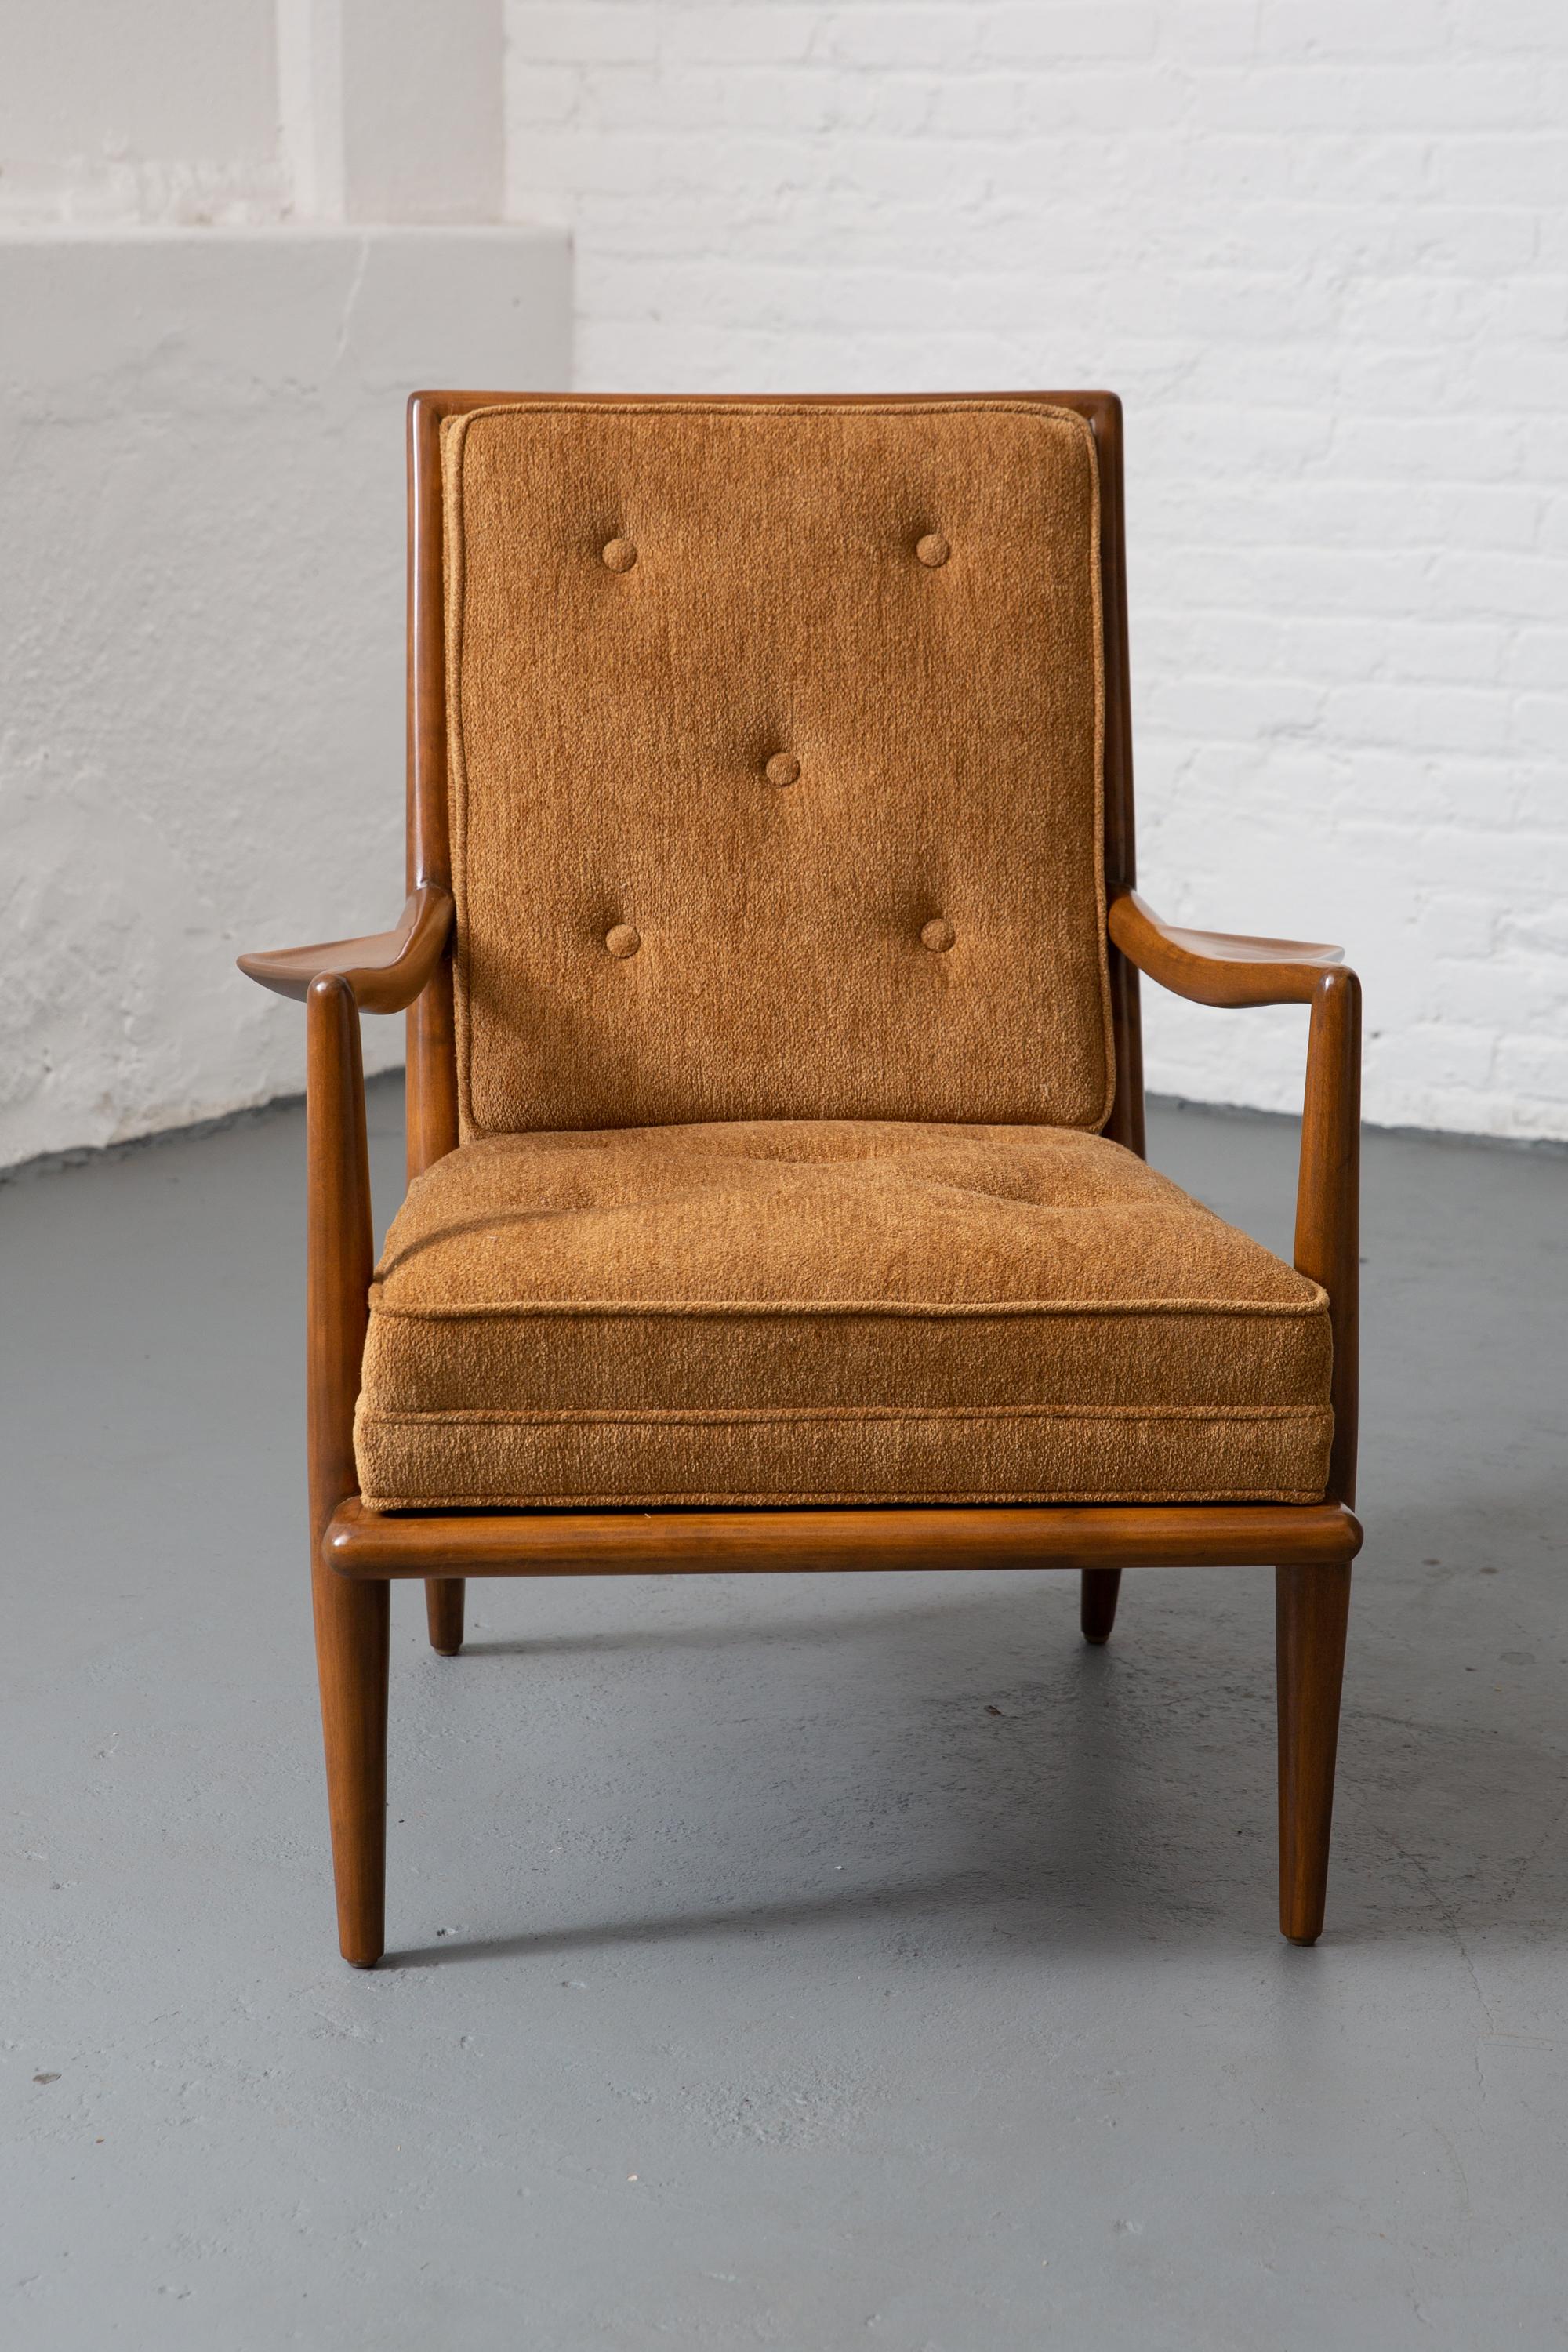 Stylish newly upholstered rare Robsjohn-Gibbings for Widdicomb Model 1716 armchair with wing arms and button tufting to seat and back. Single welting throughout. Tapered legs. Minor markings to arms and legs. Good original condition.
Measures: Arm